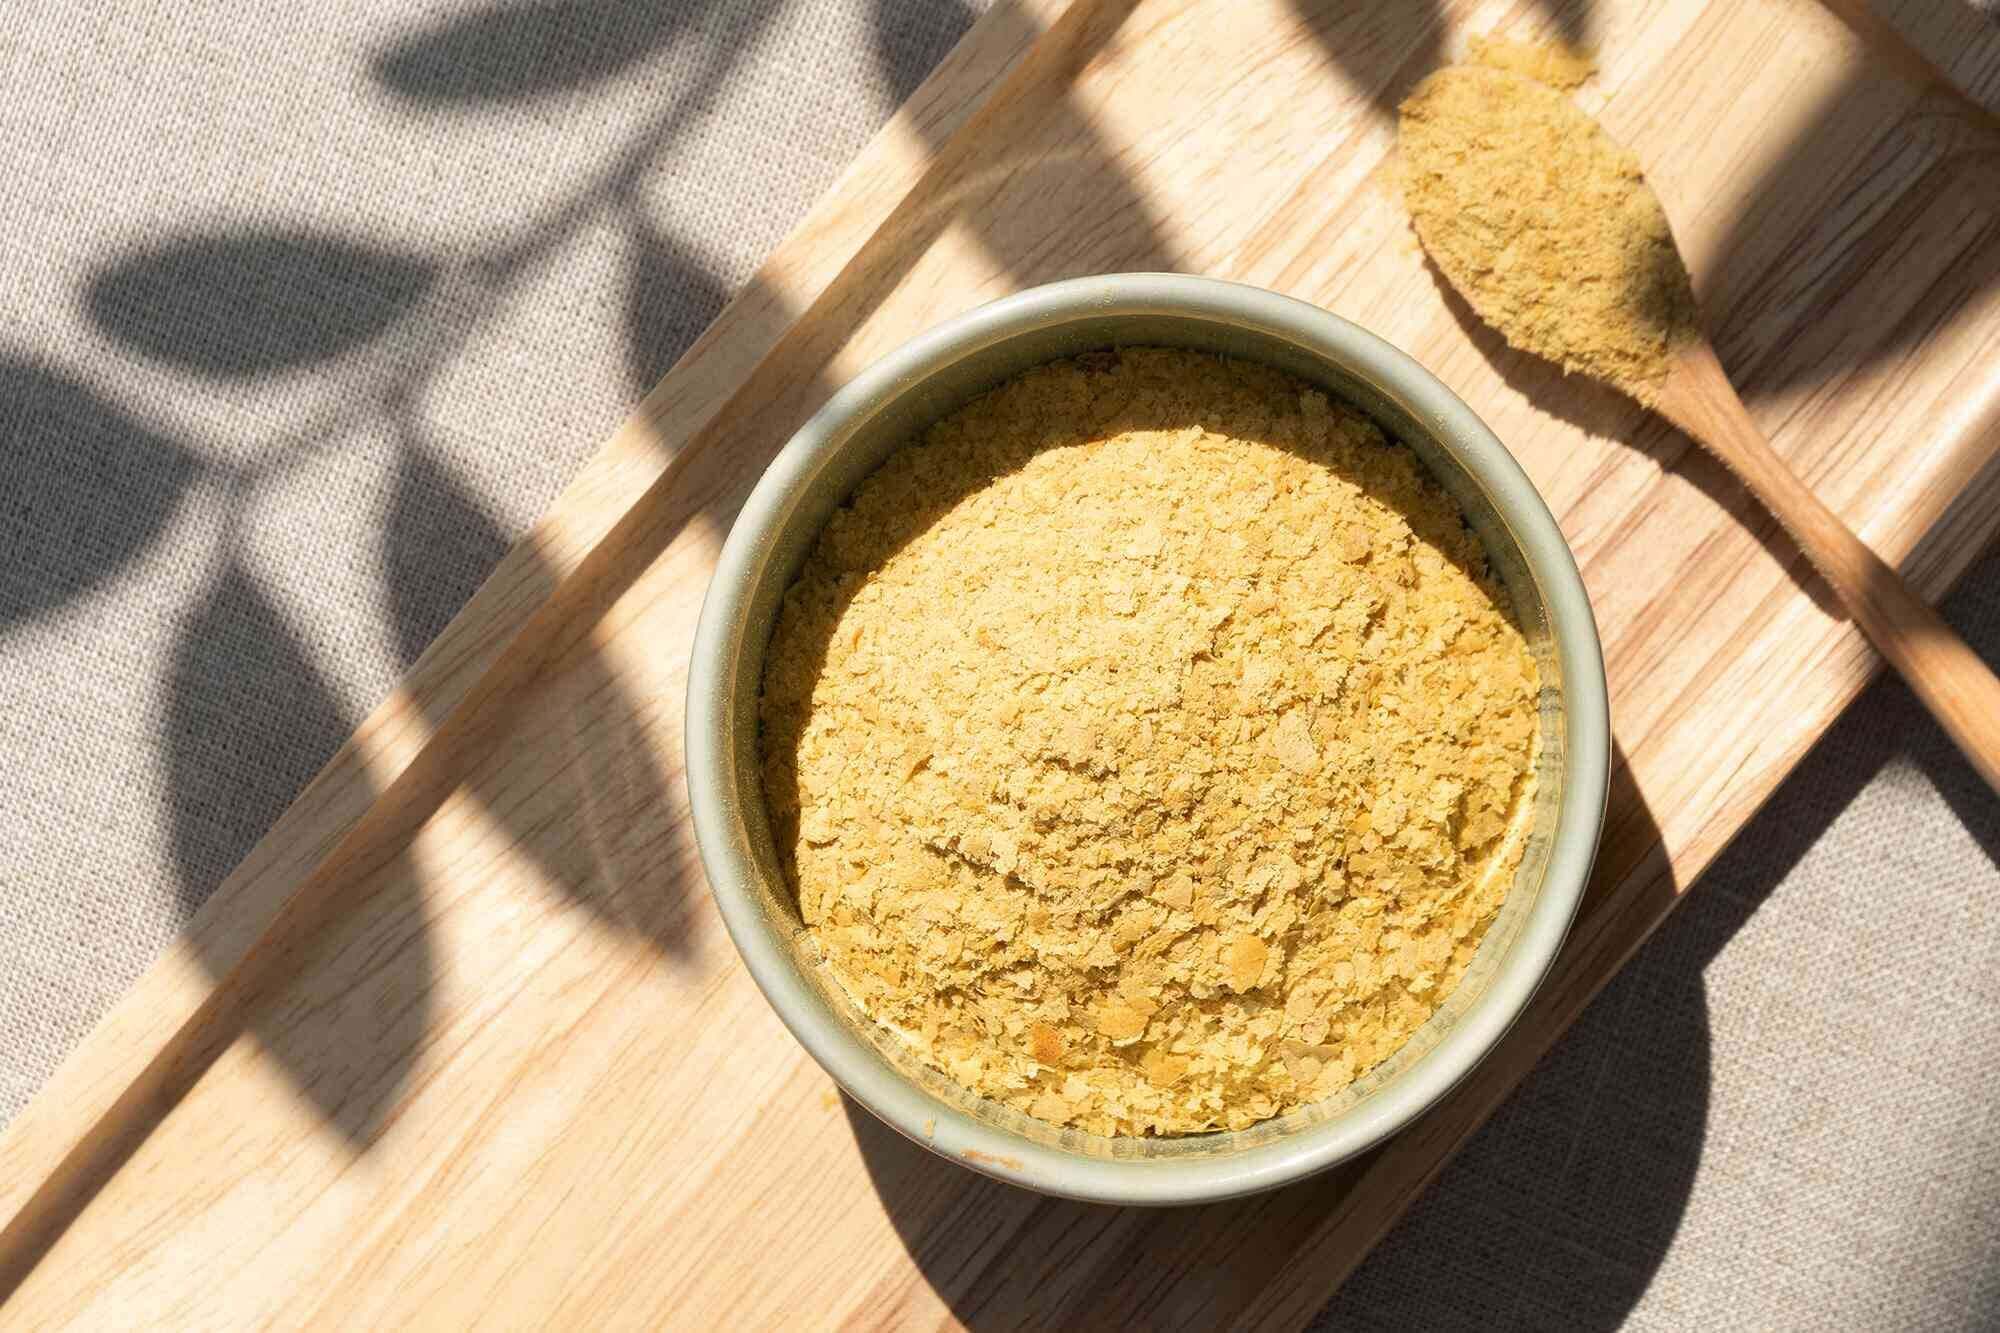 20-red-star-nutritional-yeast-nutrition-facts